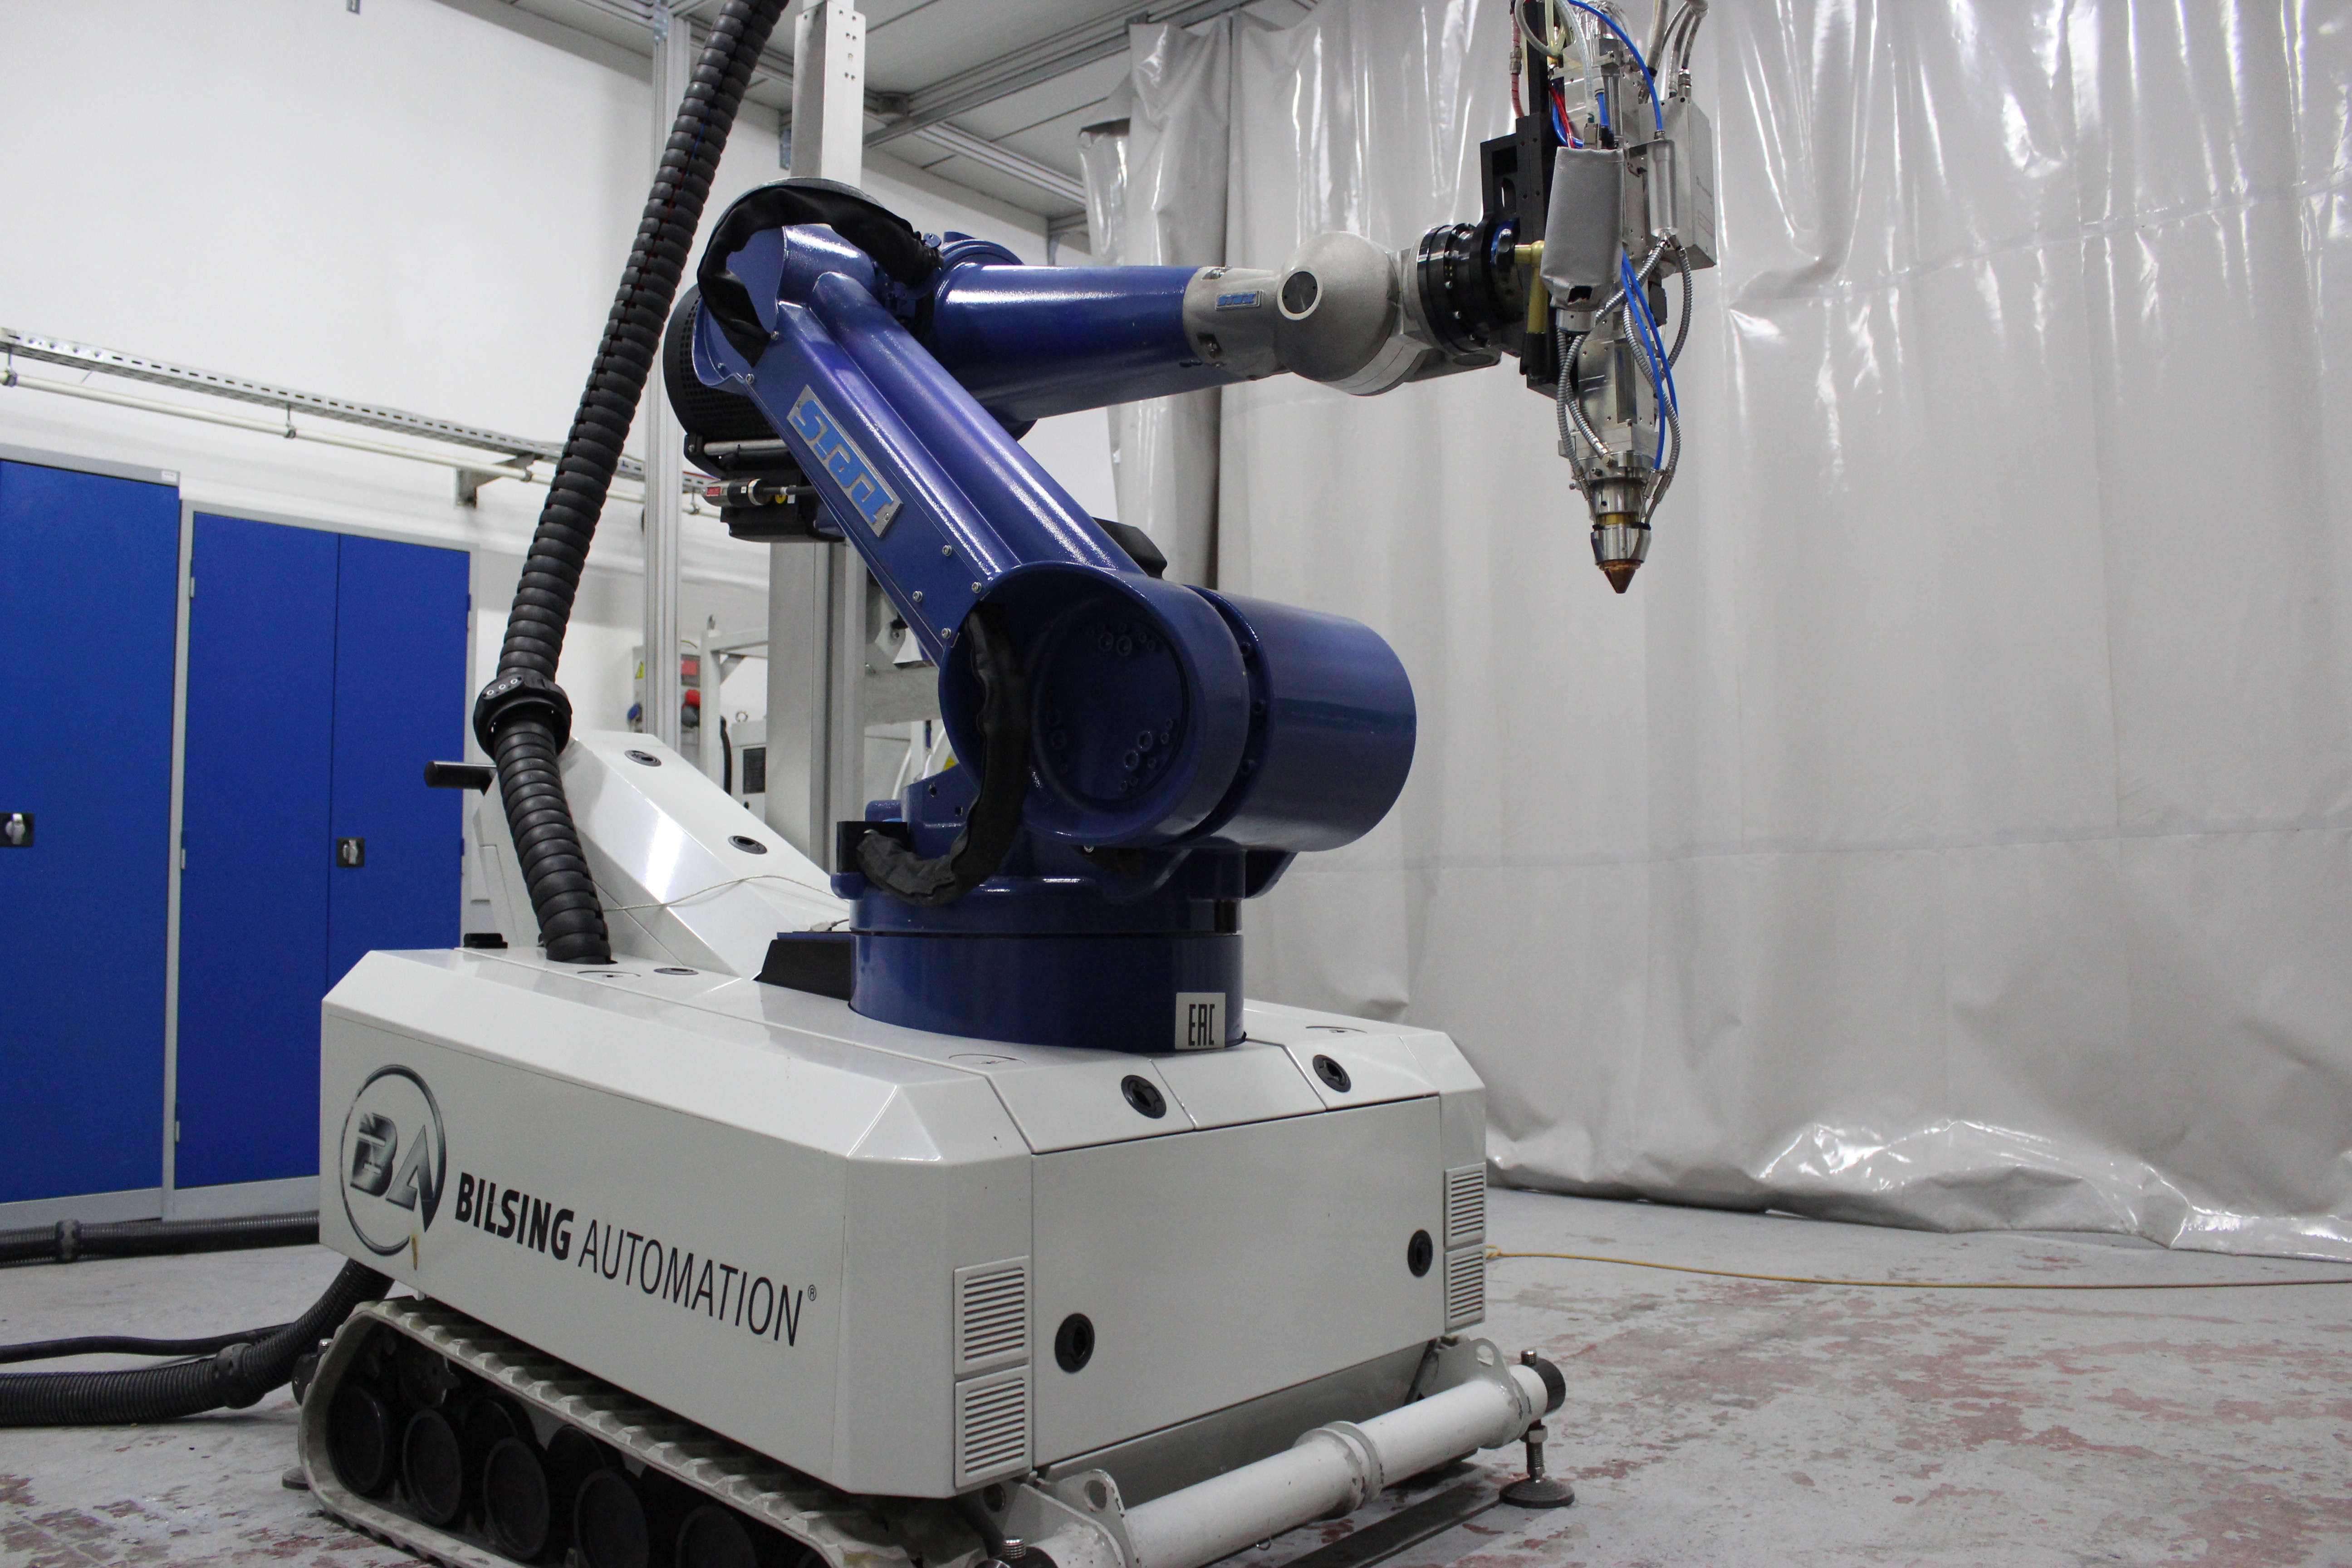 EHLA mobile: Bilsing Automation equipped a mobile robot with laser beam source, EHLA processing head and powder feed system. This resulted in the world's first mobile EHLA station. 